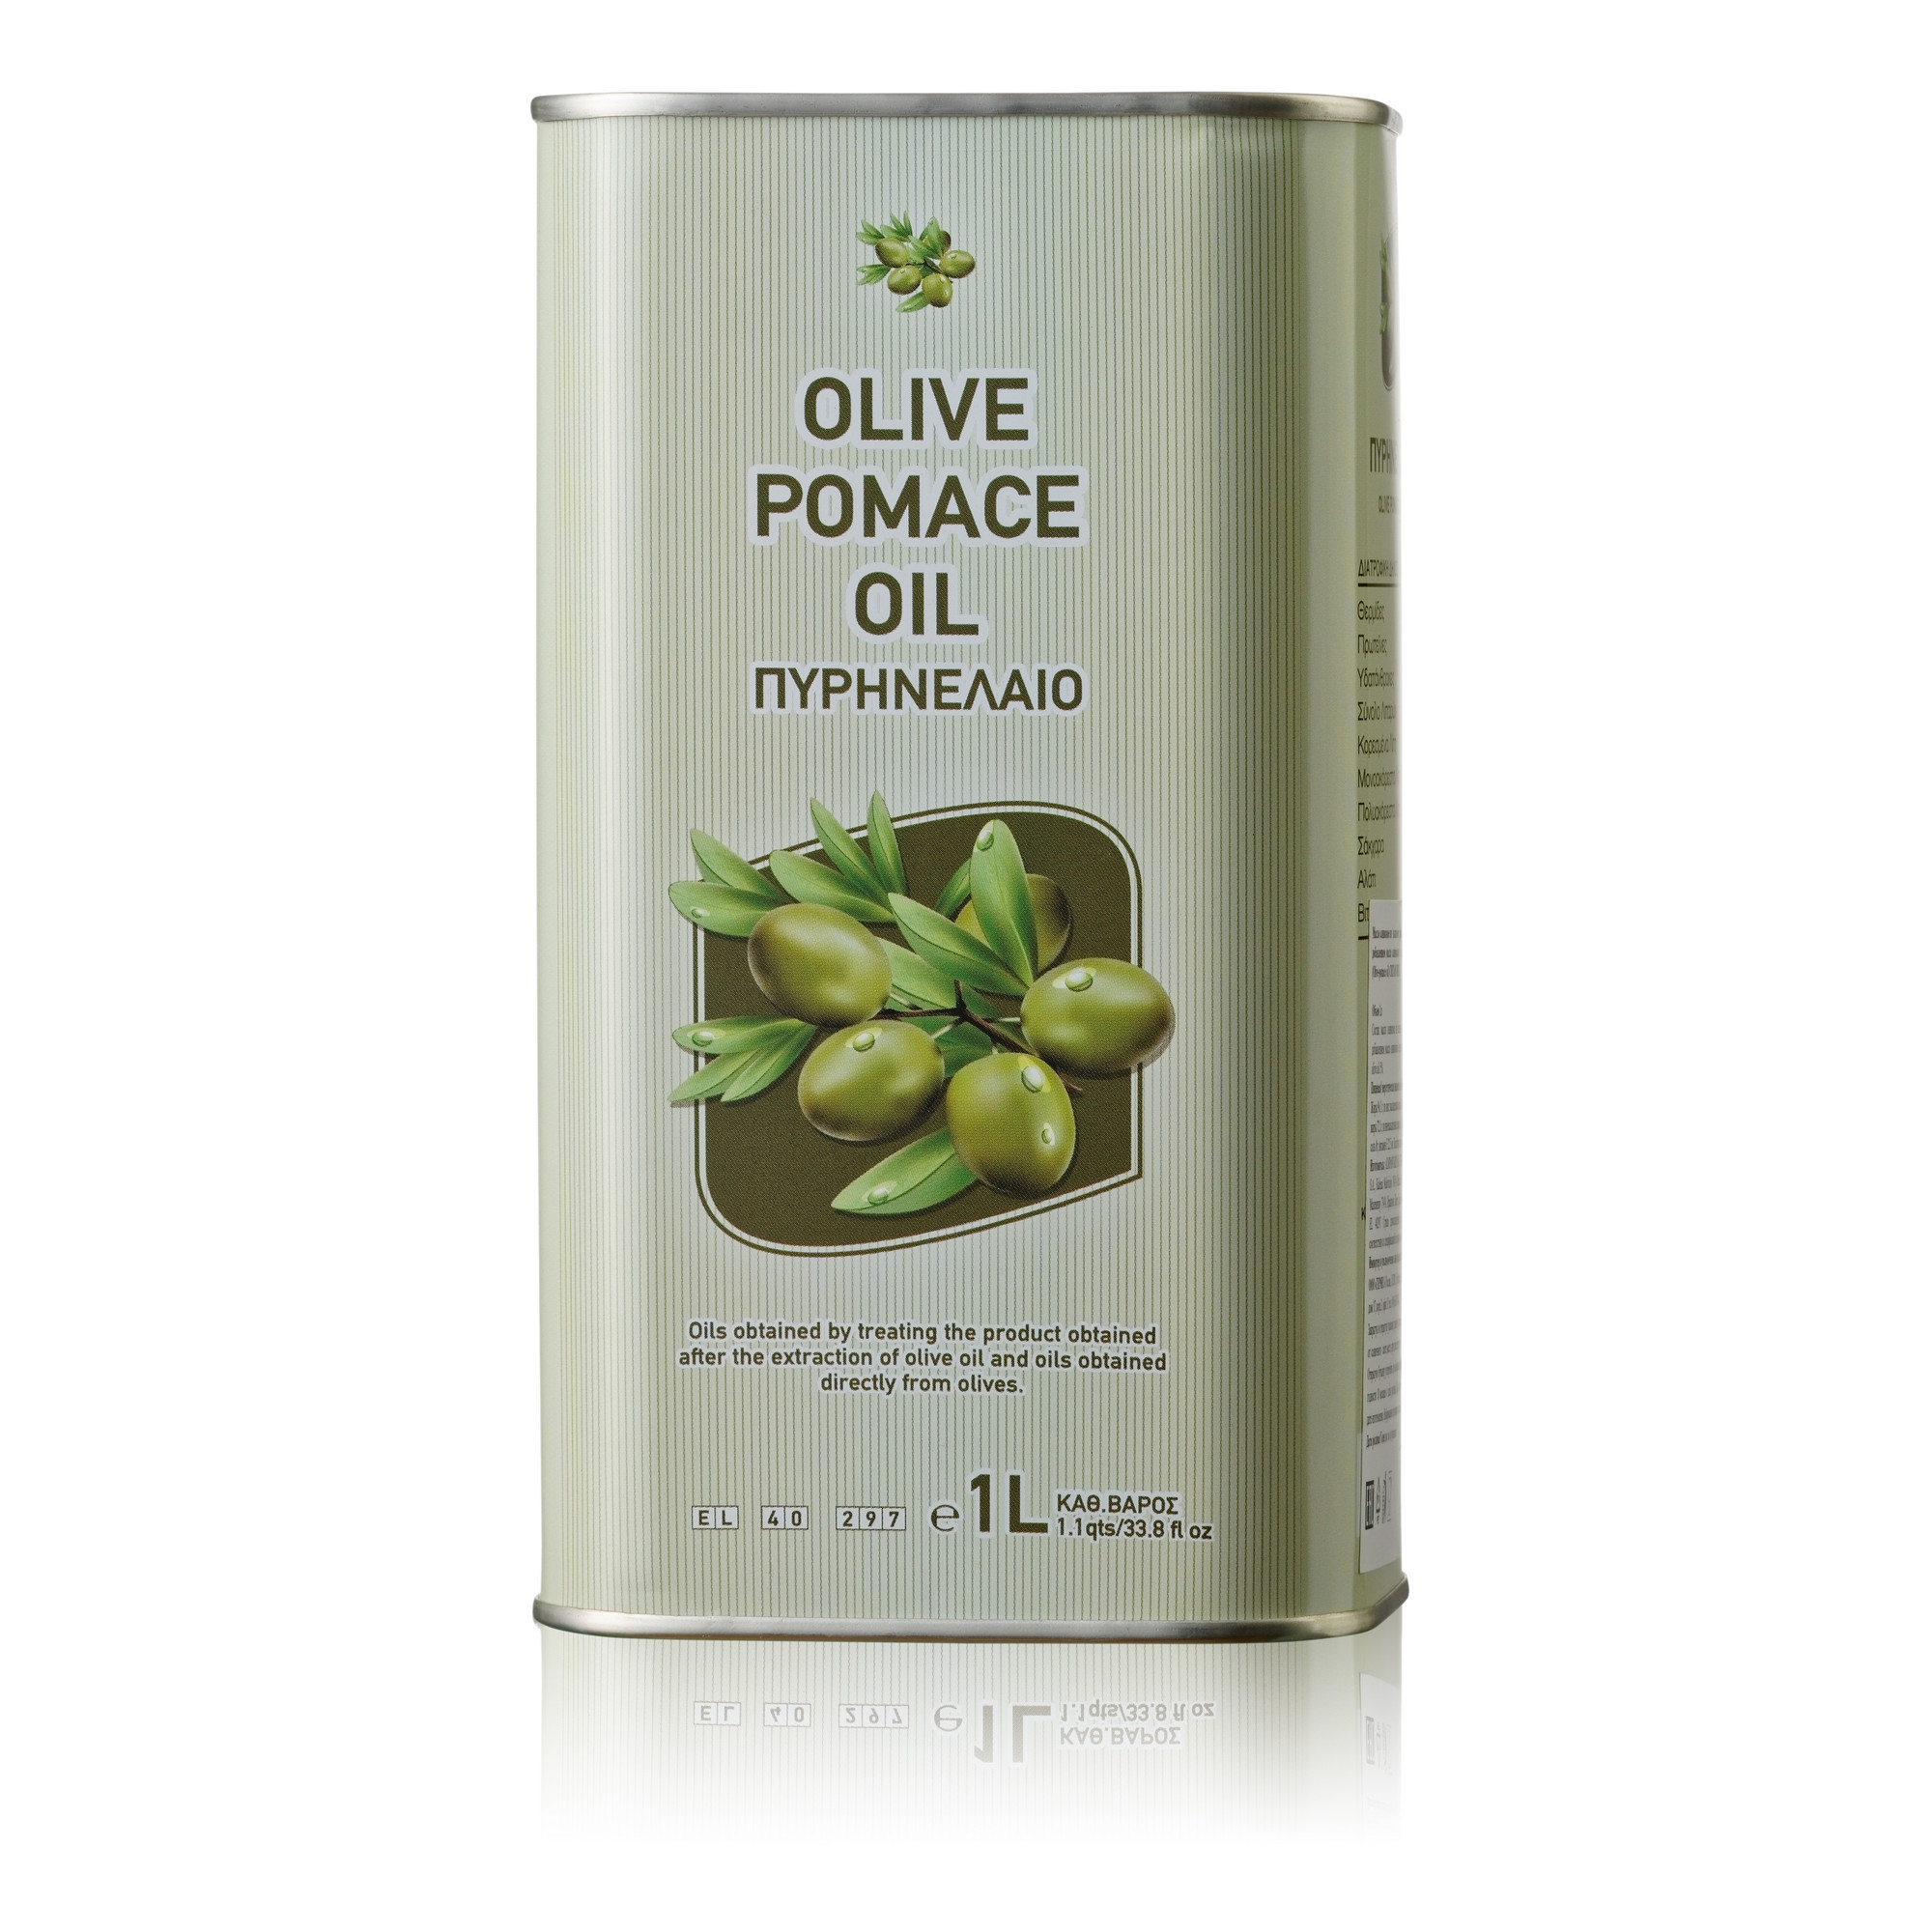 Масло оливковое помас. Оливковое масло Pomace Olive Oil, 1 л. Оливковое масло Olive Pomace Oil. Cretan Mill масло оливковое. Extra Pomace оливковое масло.